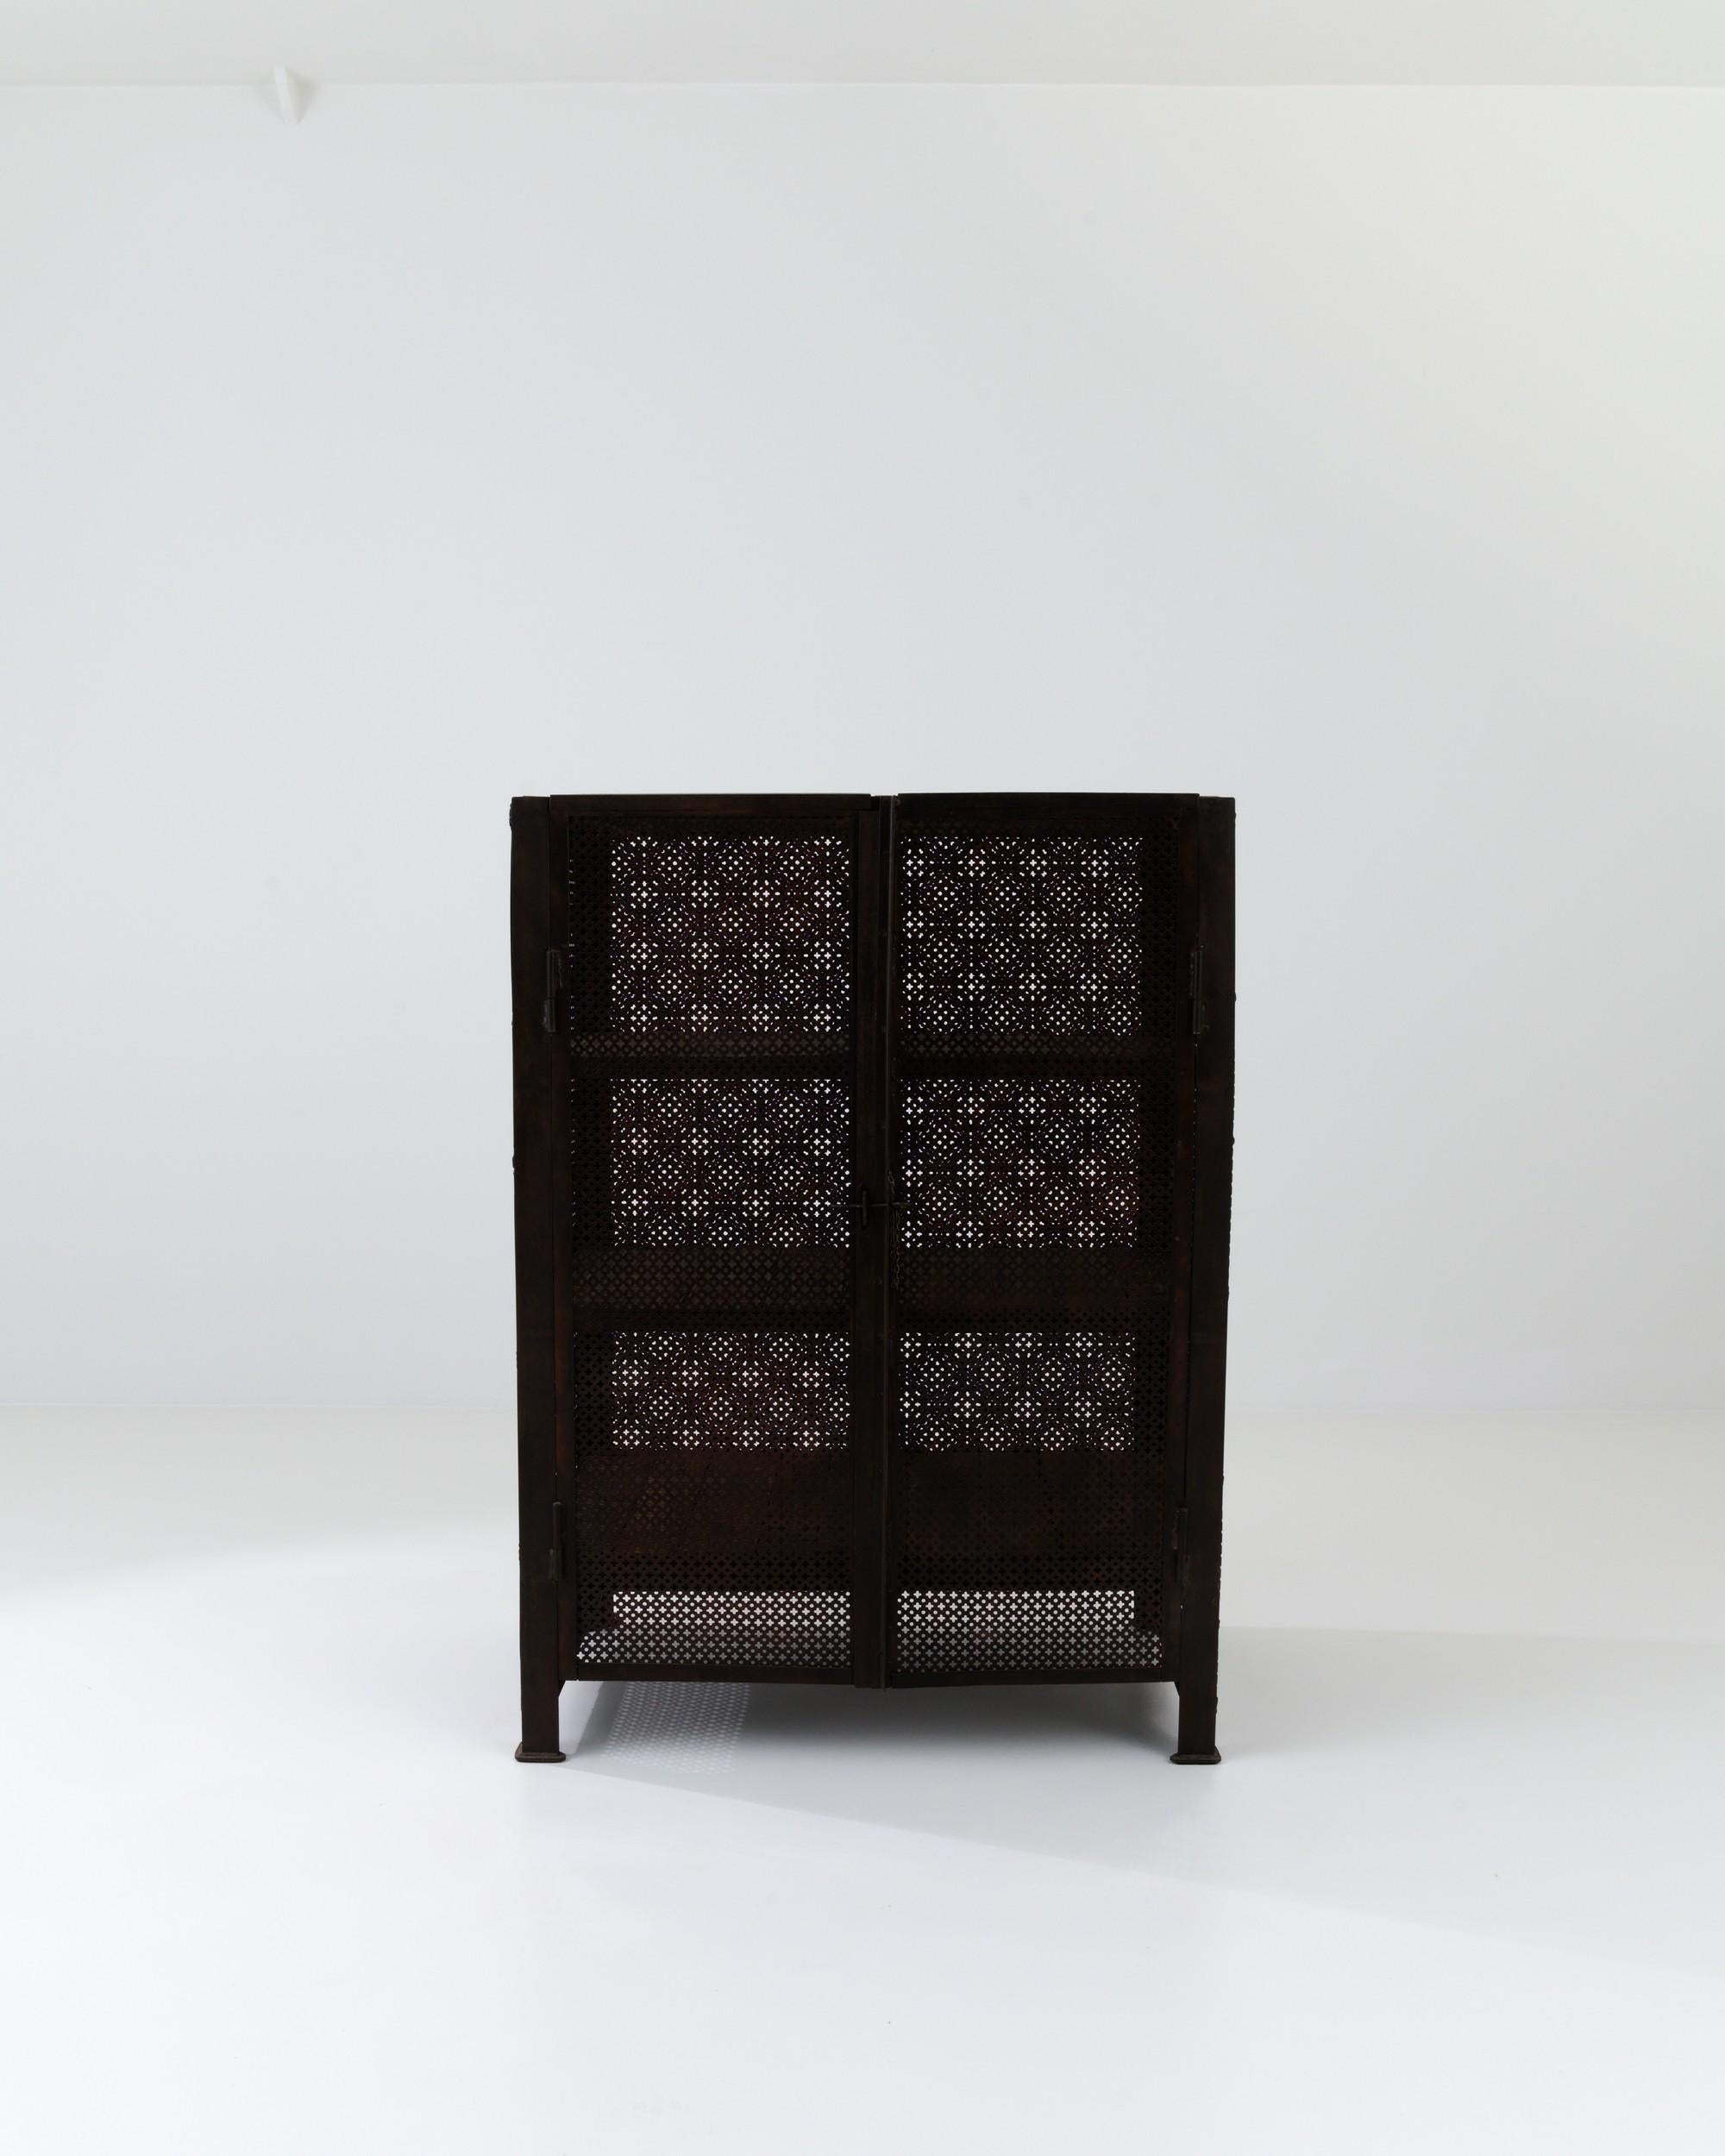 This antique metal cabinet marries a robust silhouette with delicate geometric patterning to create a unique early Industrial aesthetic. Built in France in the 1800s, the deep ferrous patina of the metal brings depth to the clean design. The frame